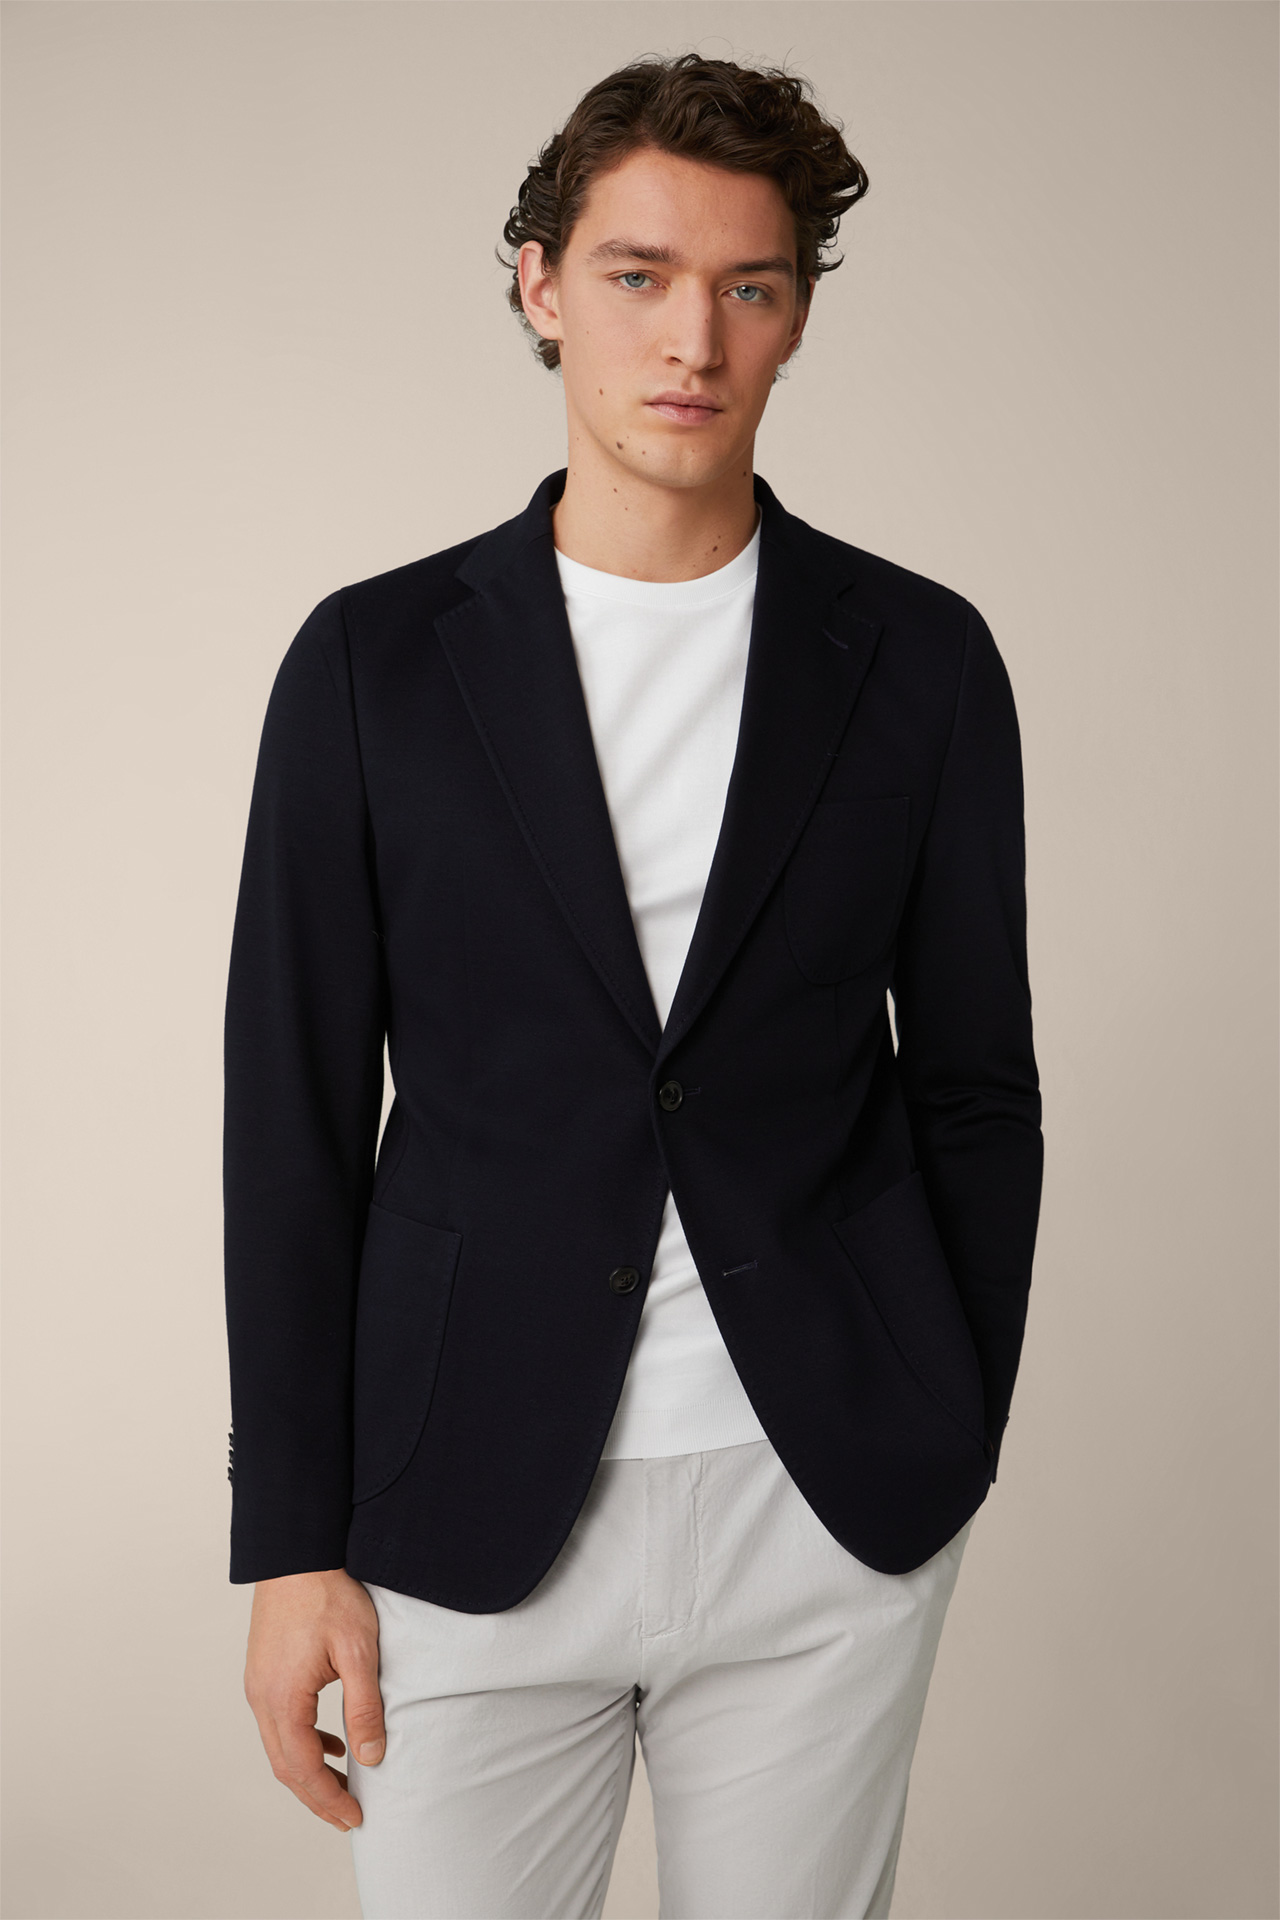 Maglia Jersey Jacket in Navy